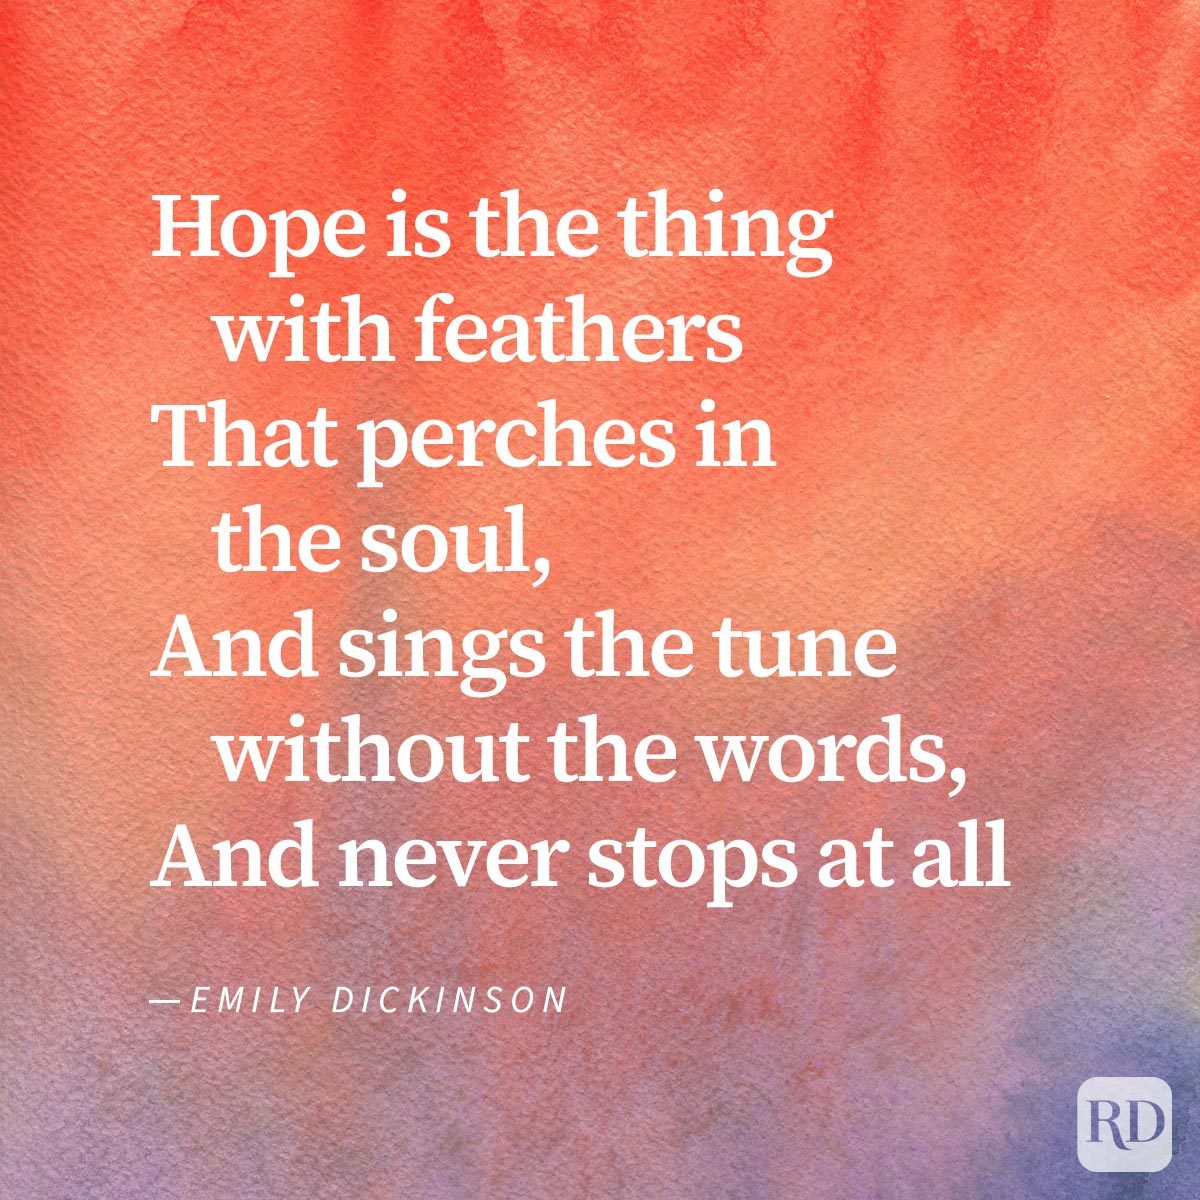 20 Powerful Poems About Life That Will Change How You See The World 7